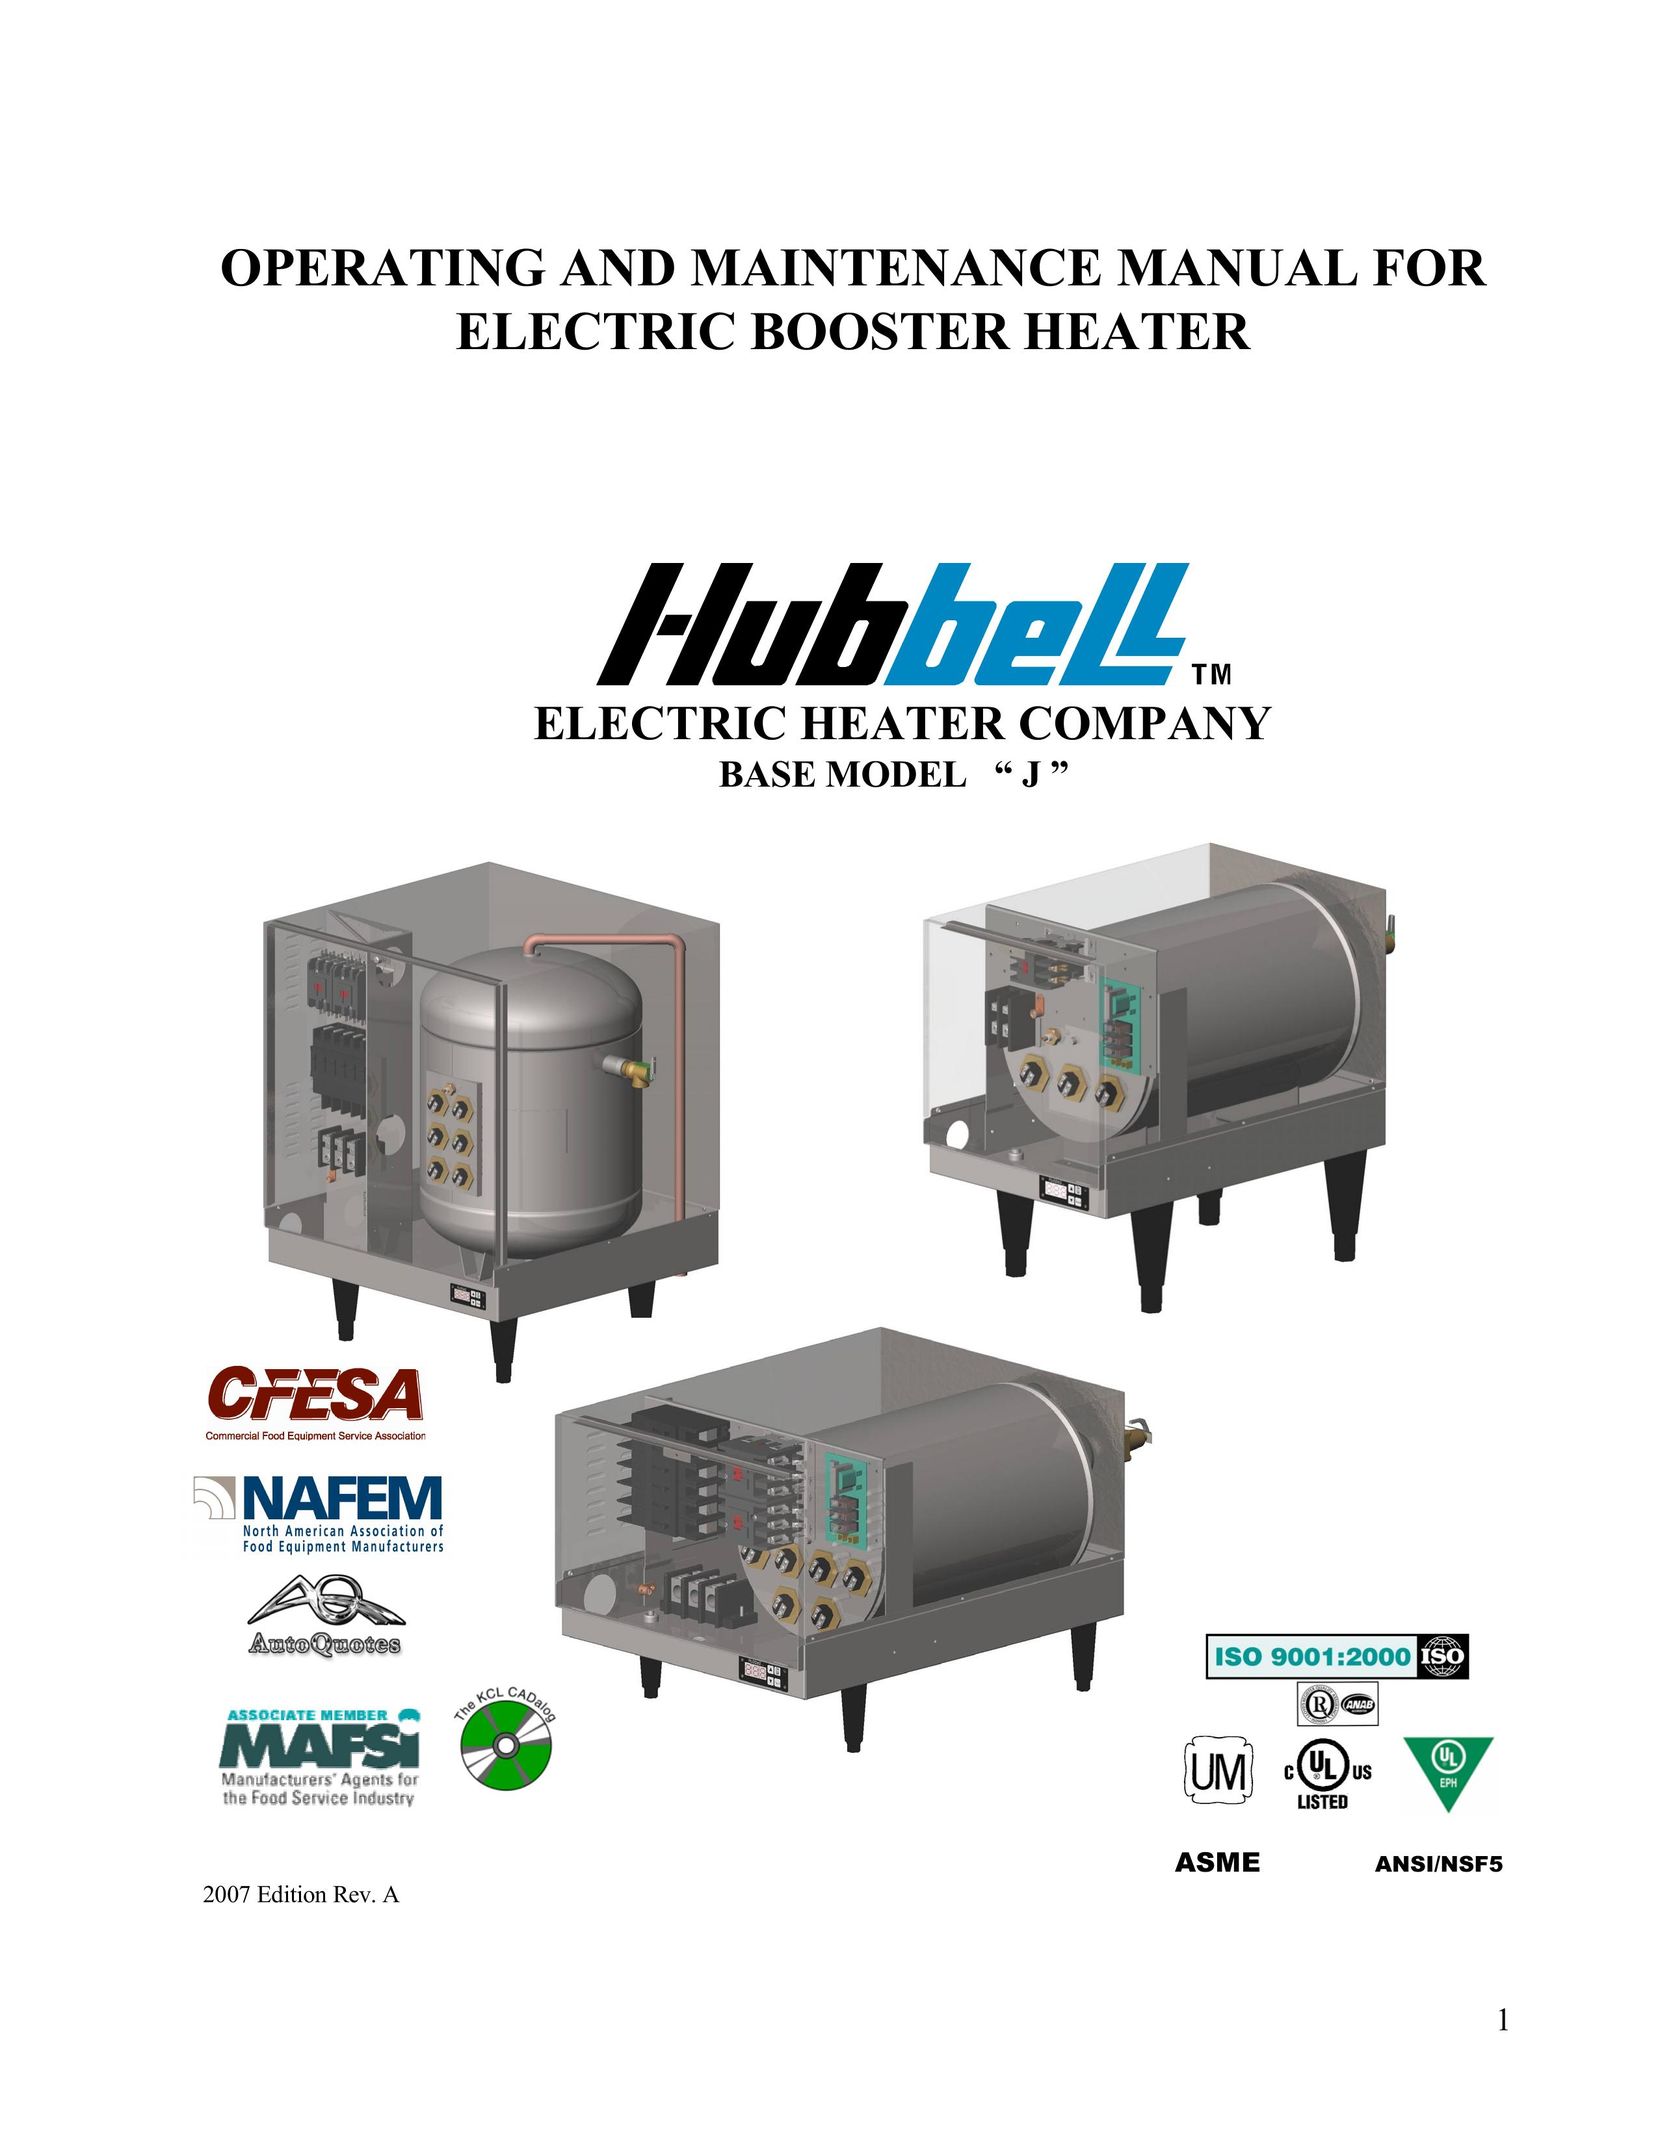 Hubbell Electric Heater Company J Water Heater User Manual